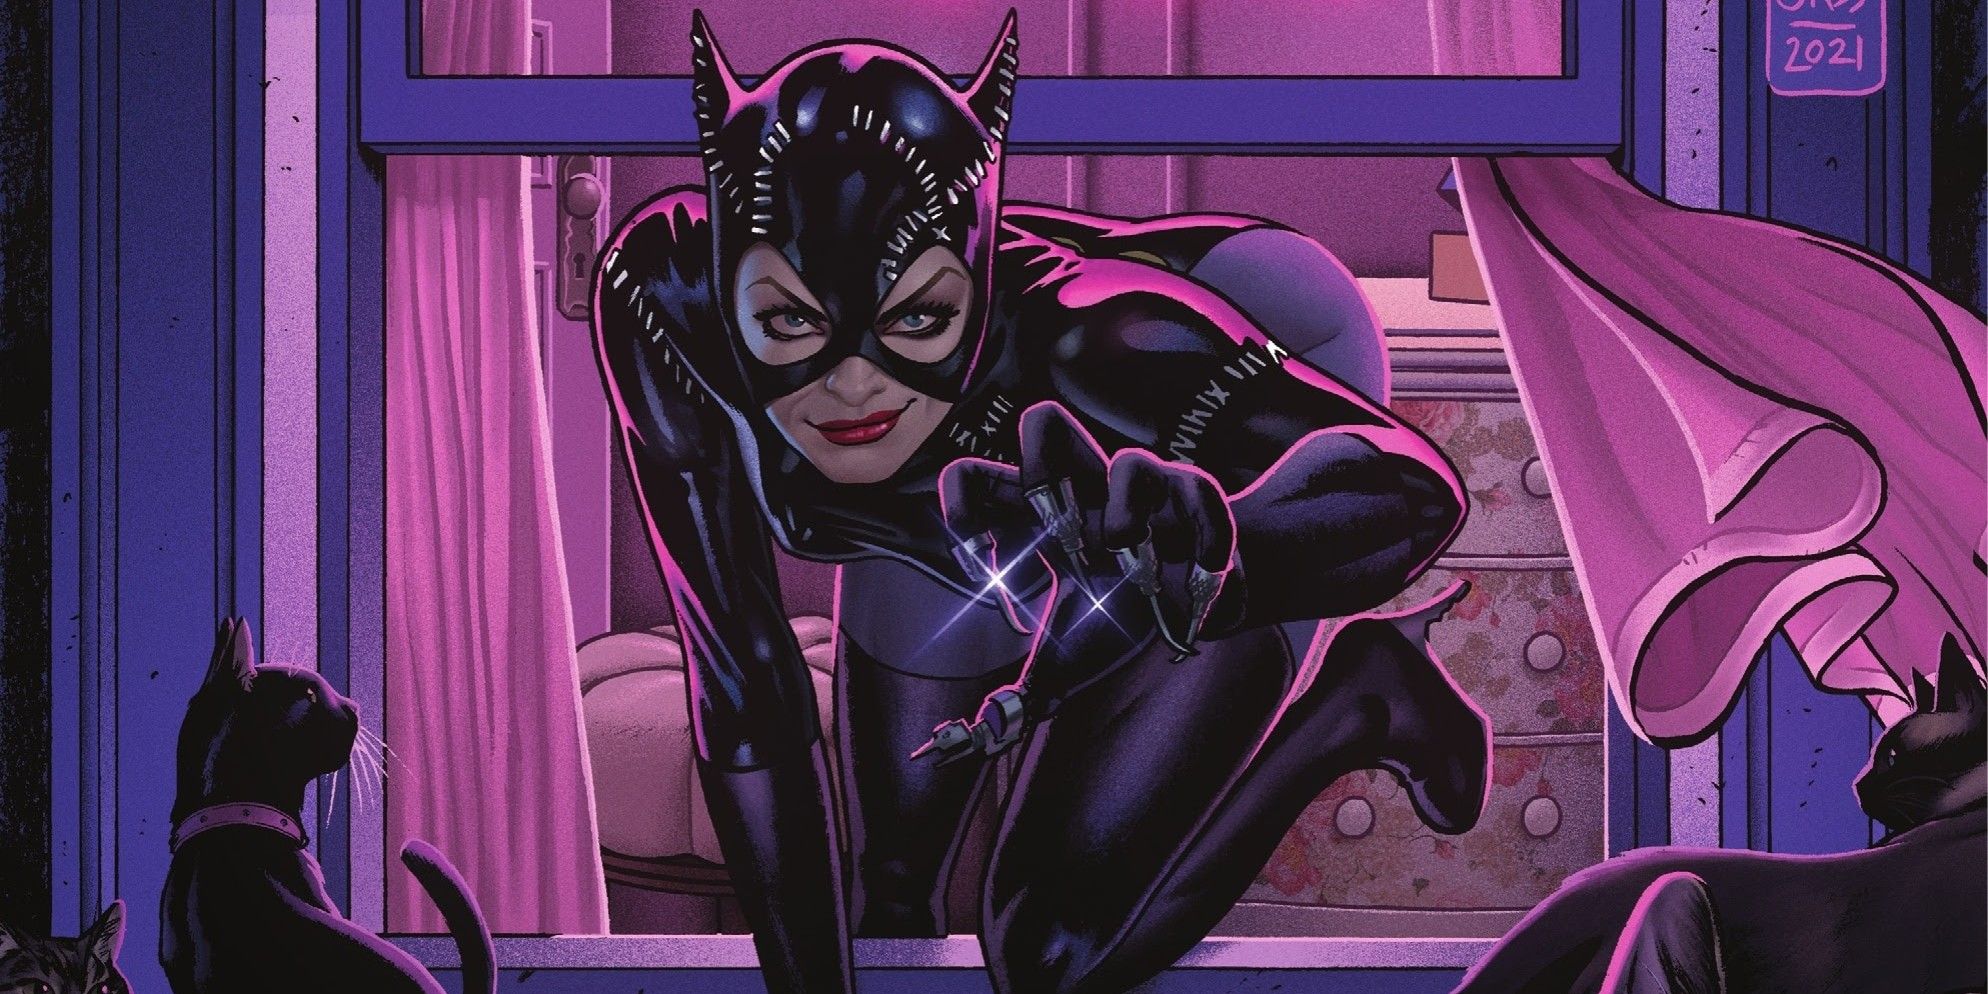 Catwoman leaves her apartment from the Batman 89 comic